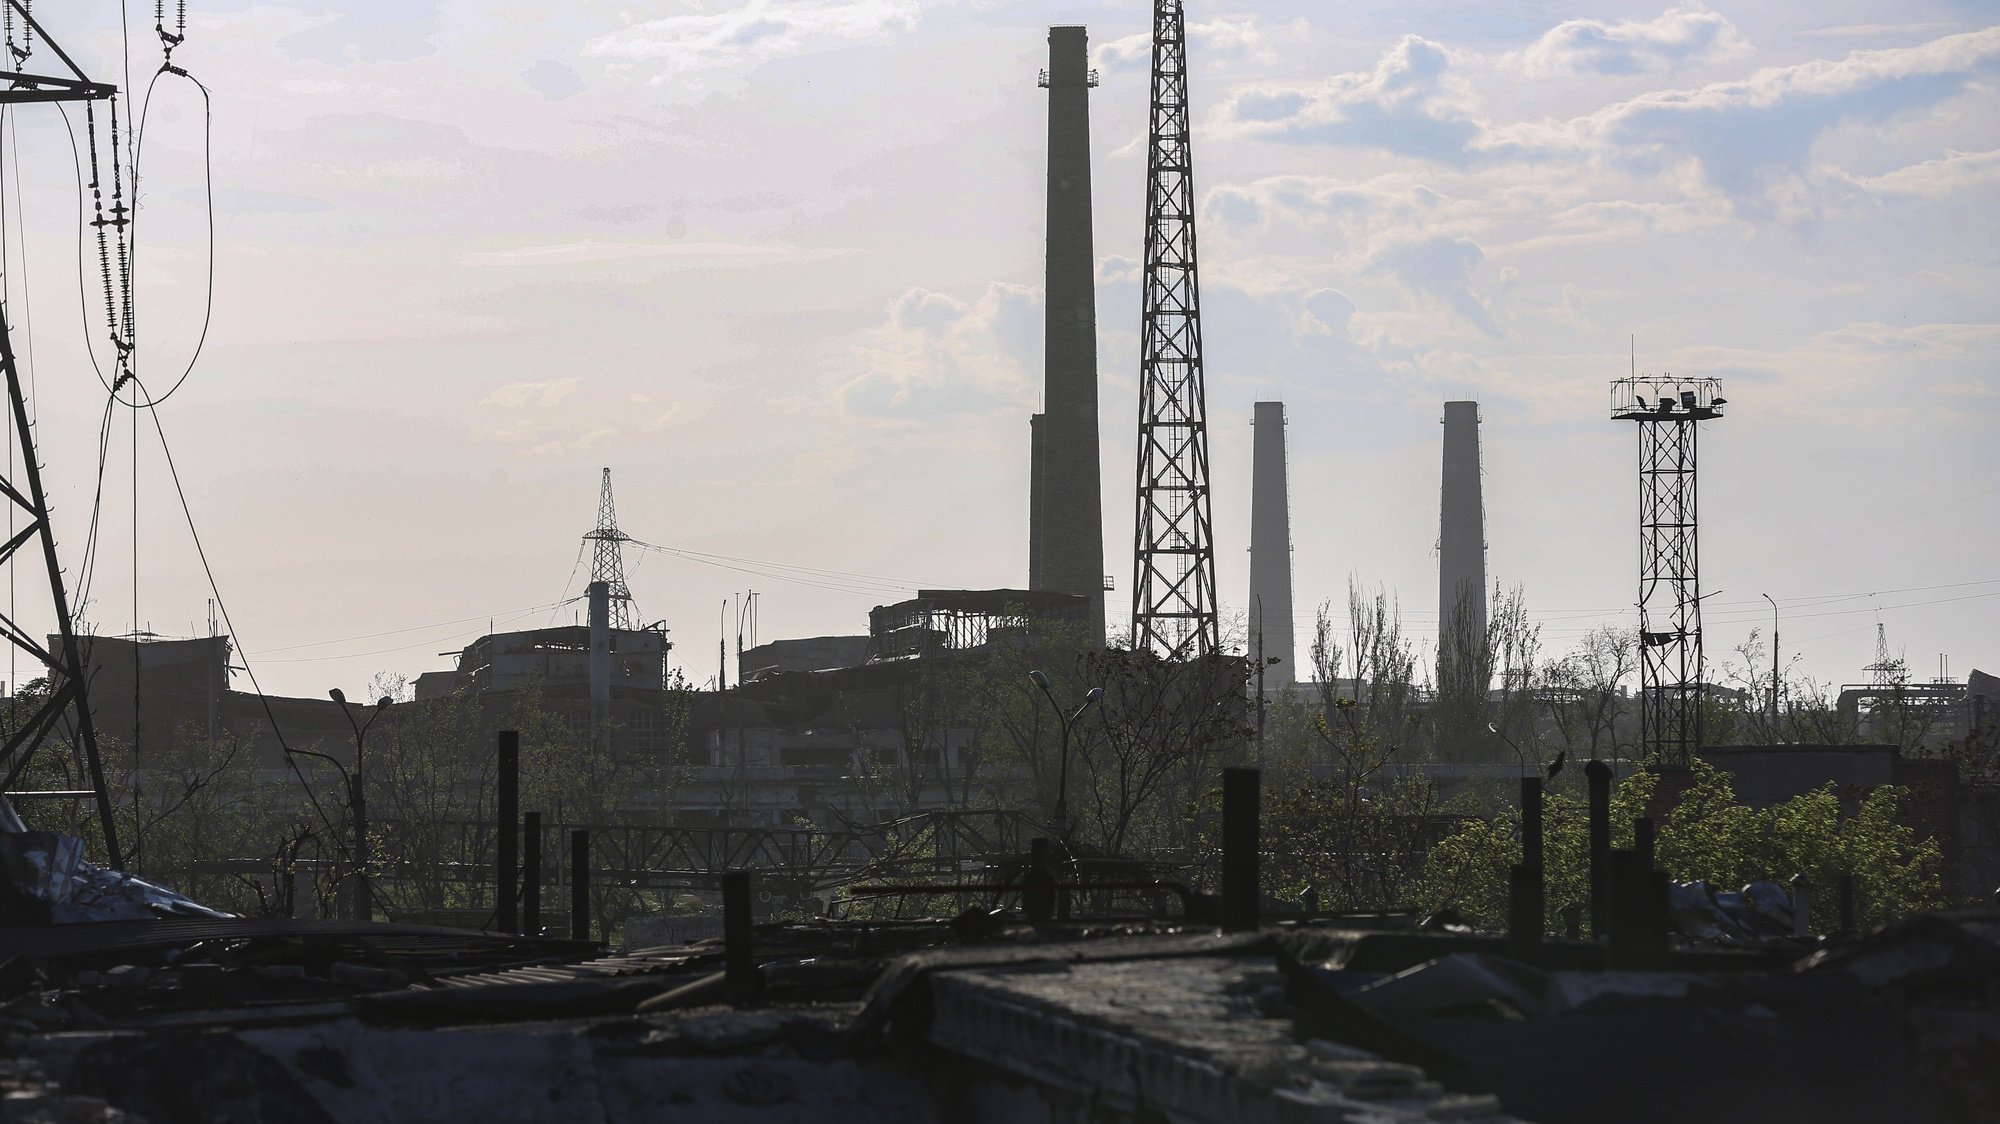 epaselect epa09965030 The Azovstal steel plant in Mariupol, Ukraine, 21 May 2022 (issued 22 May 2022). The Chief spokesman of the Russian Defense Ministry, Major General Igor Konashenkov, said on 20 May that the long-besieged Azovstal steel plant in Mariupol was under full Russian army control.  EPA/ALESSANDRO GUERRA